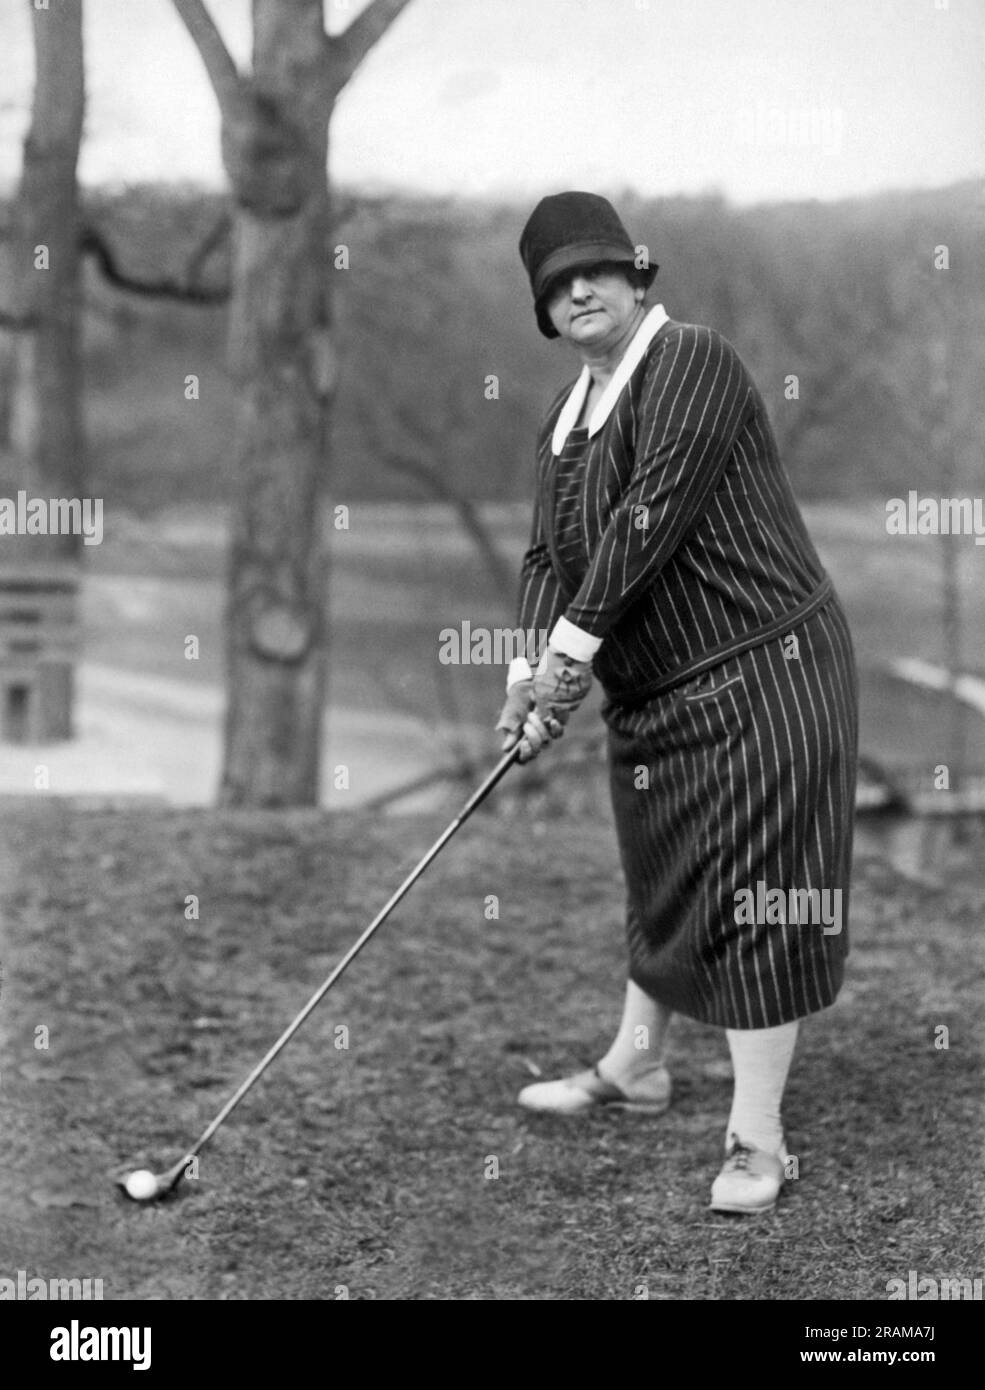 White Sulphur Springs, West Virginia:  March 16, 1927. A resident of New York plays golf while vacationing for the winter in West Virginia. Stock Photo